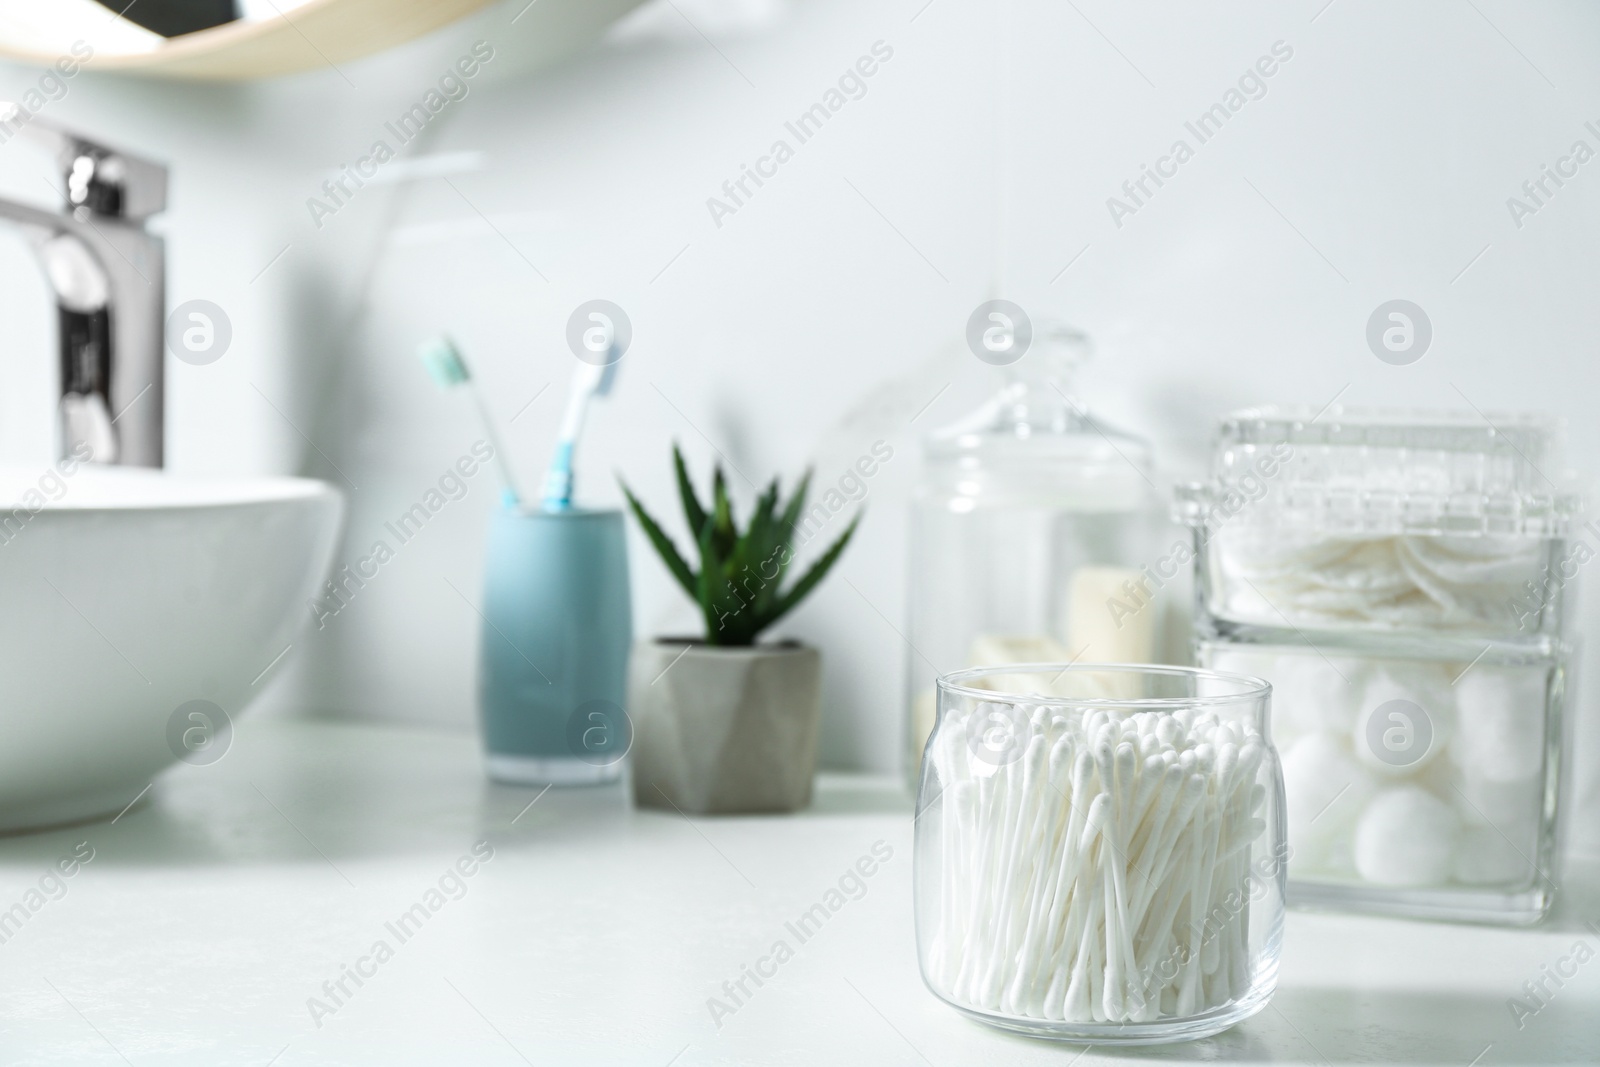 Photo of Jar with cotton swabs on white countertop in bathroom